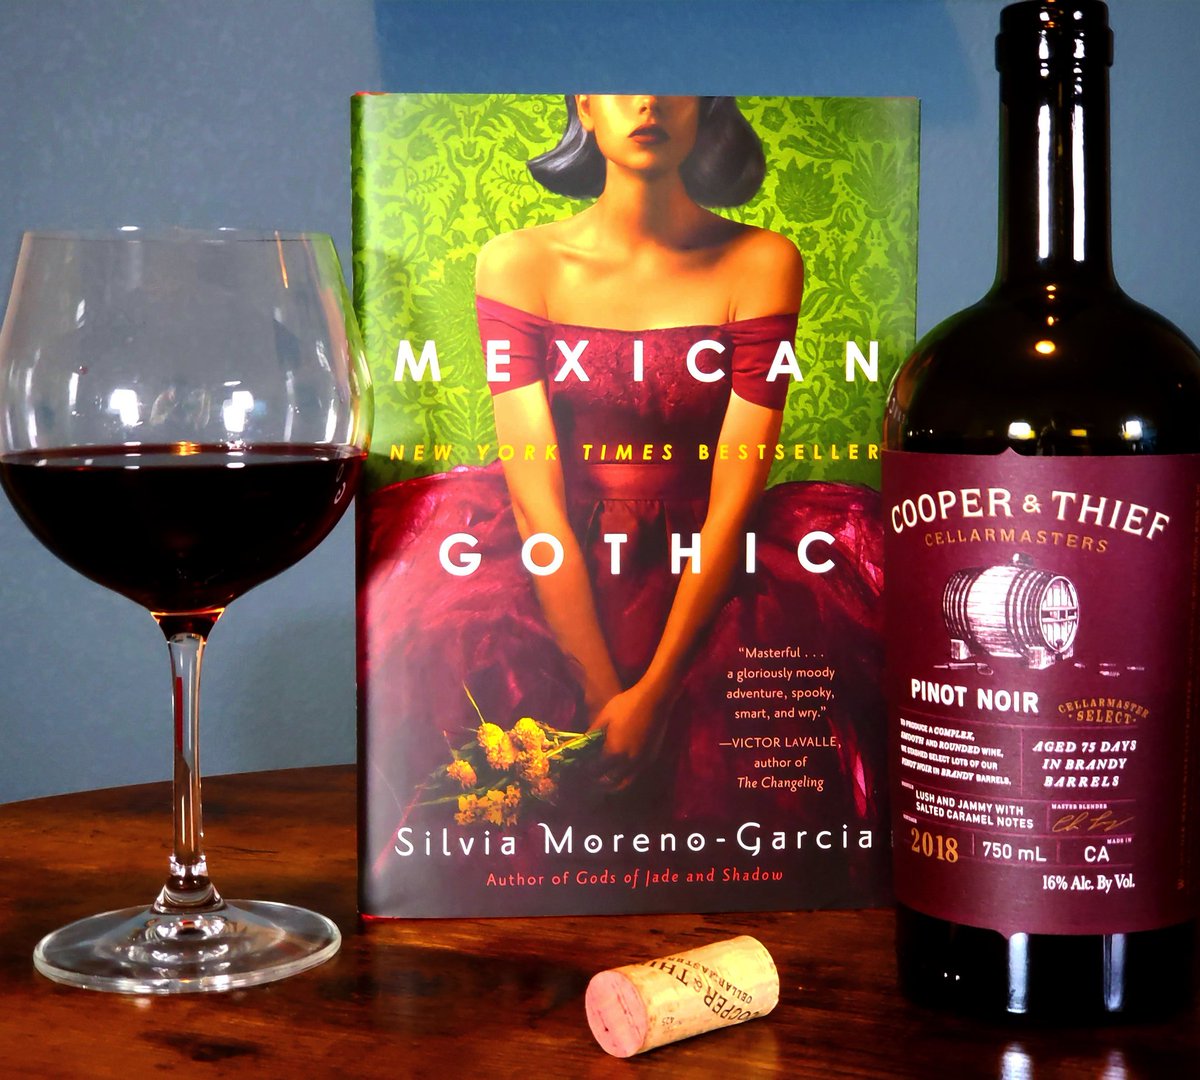 Saturday night fright with a sweet brandy barrel aged Pinot Noir 📖🍷

#wine #winetime  #pinotnoir #horrorbooks  #silviamorenogarcia #mexicangothic  #book #books #cheers #bookndrink